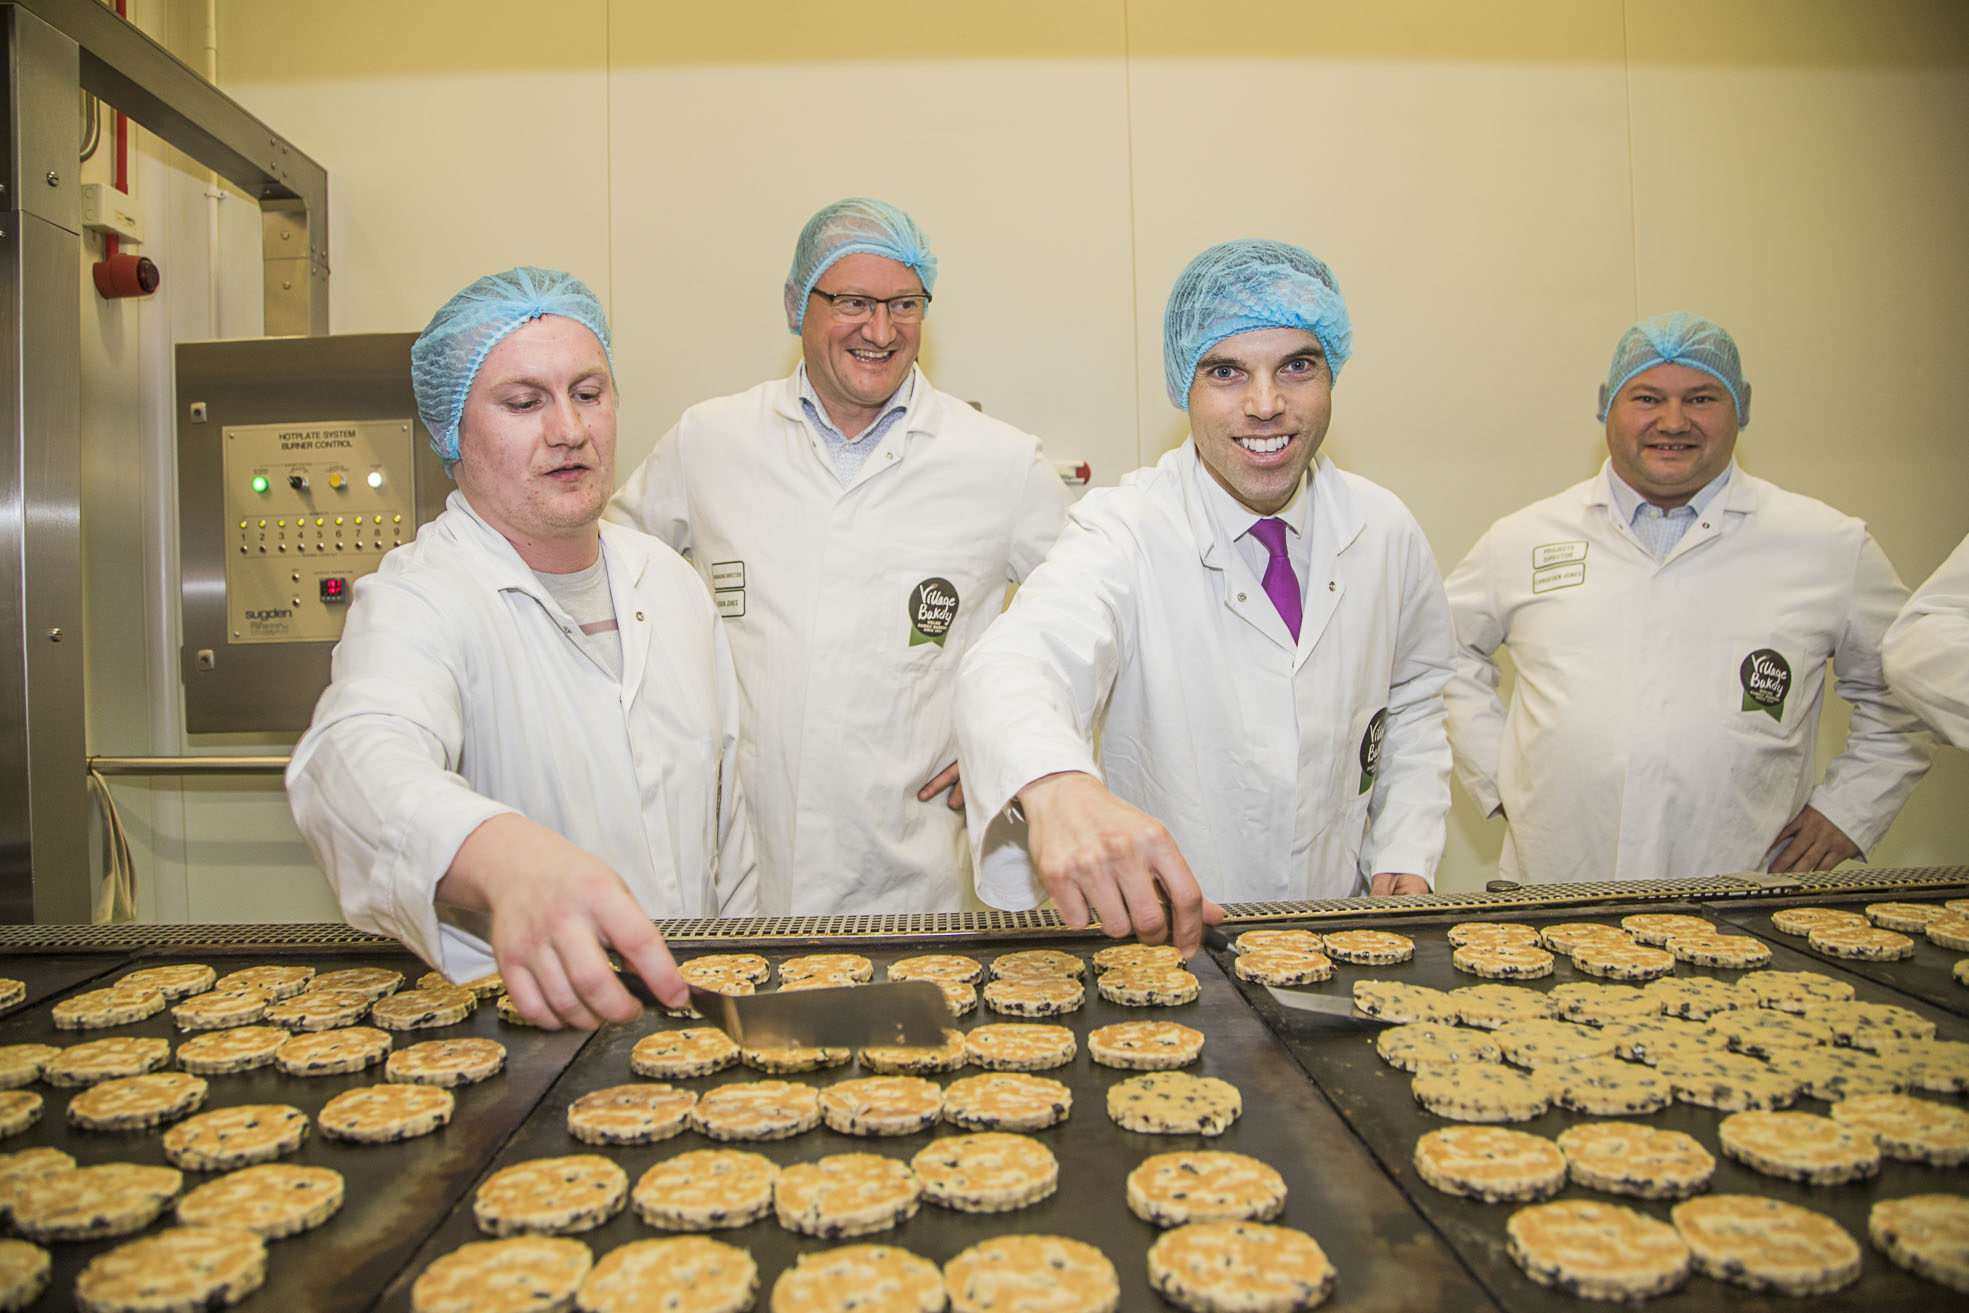 Flippin’ heck, the Village Bakery is now the world’s biggest producer of Welsh Cakes